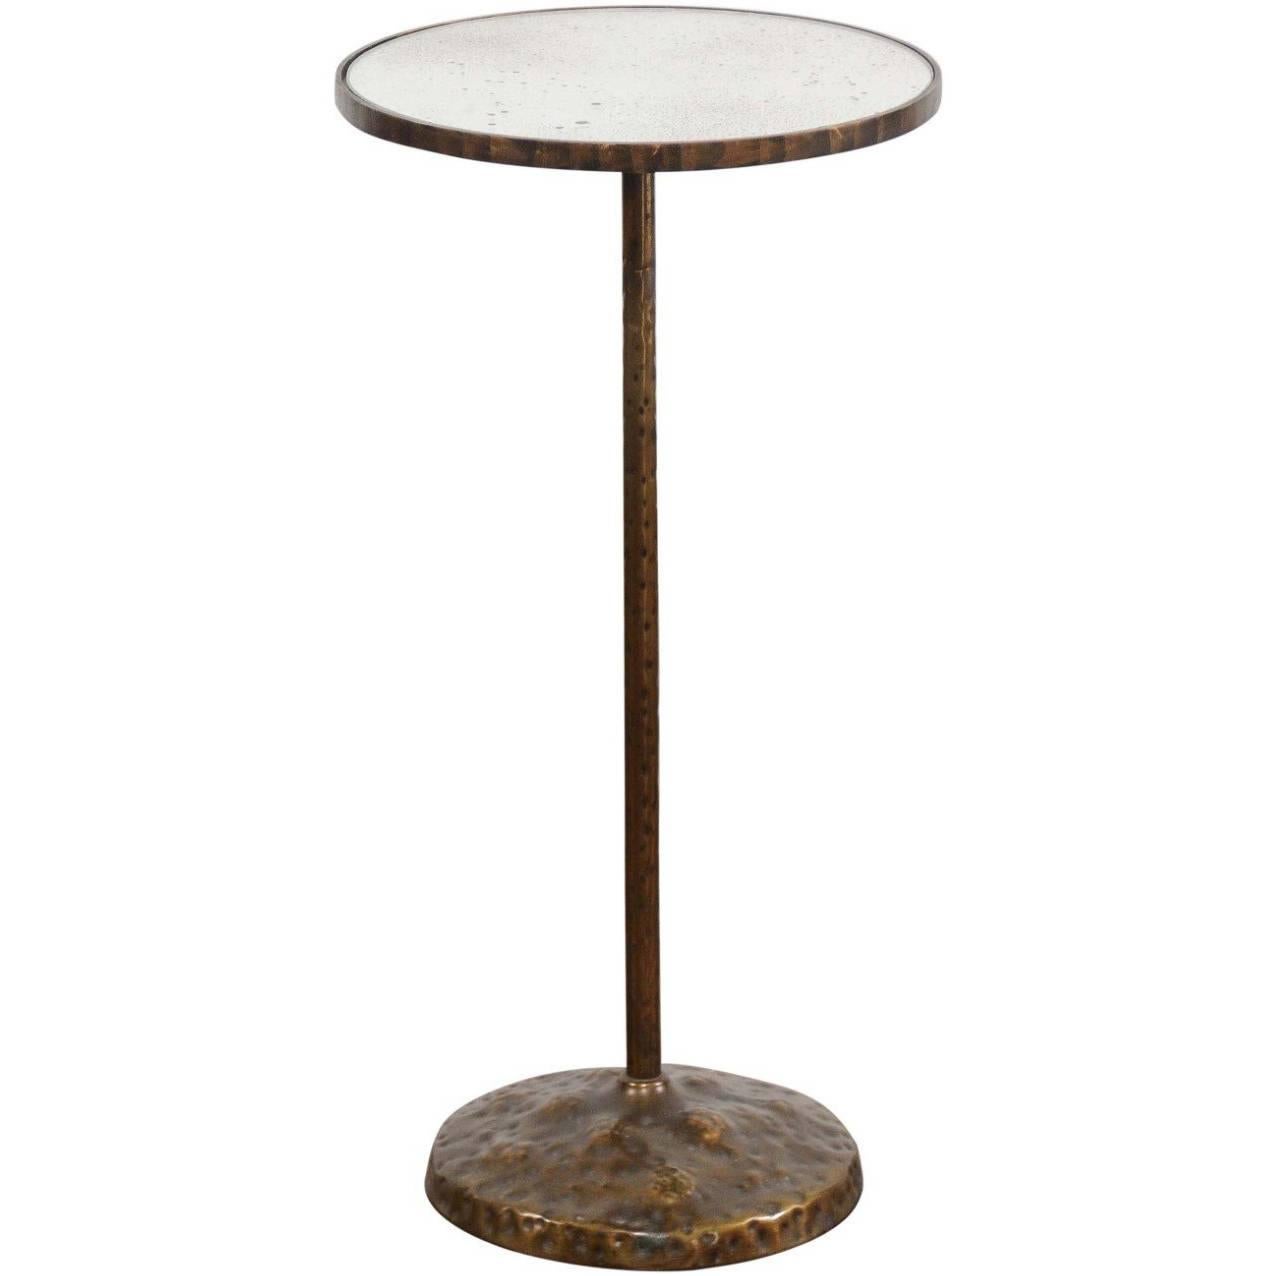 French Round Copper Round Drink Table with Pedestal Base, circa 1920-1930